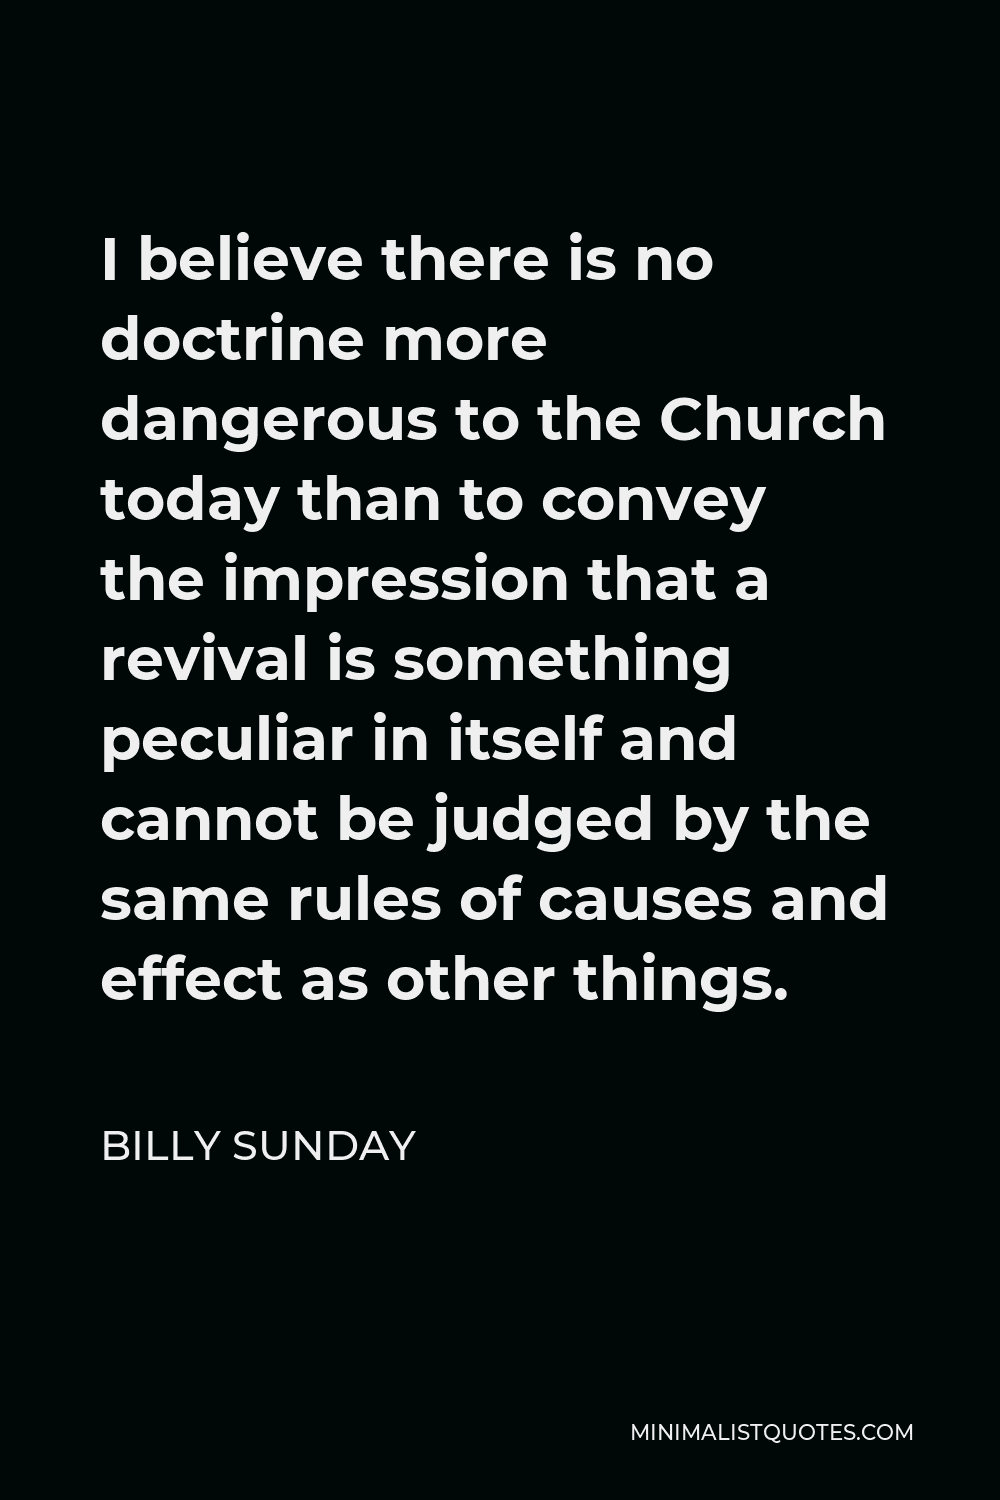 Billy Sunday Quote - I believe there is no doctrine more dangerous to the Church today than to convey the impression that a revival is something peculiar in itself and cannot be judged by the same rules of causes and effect as other things.